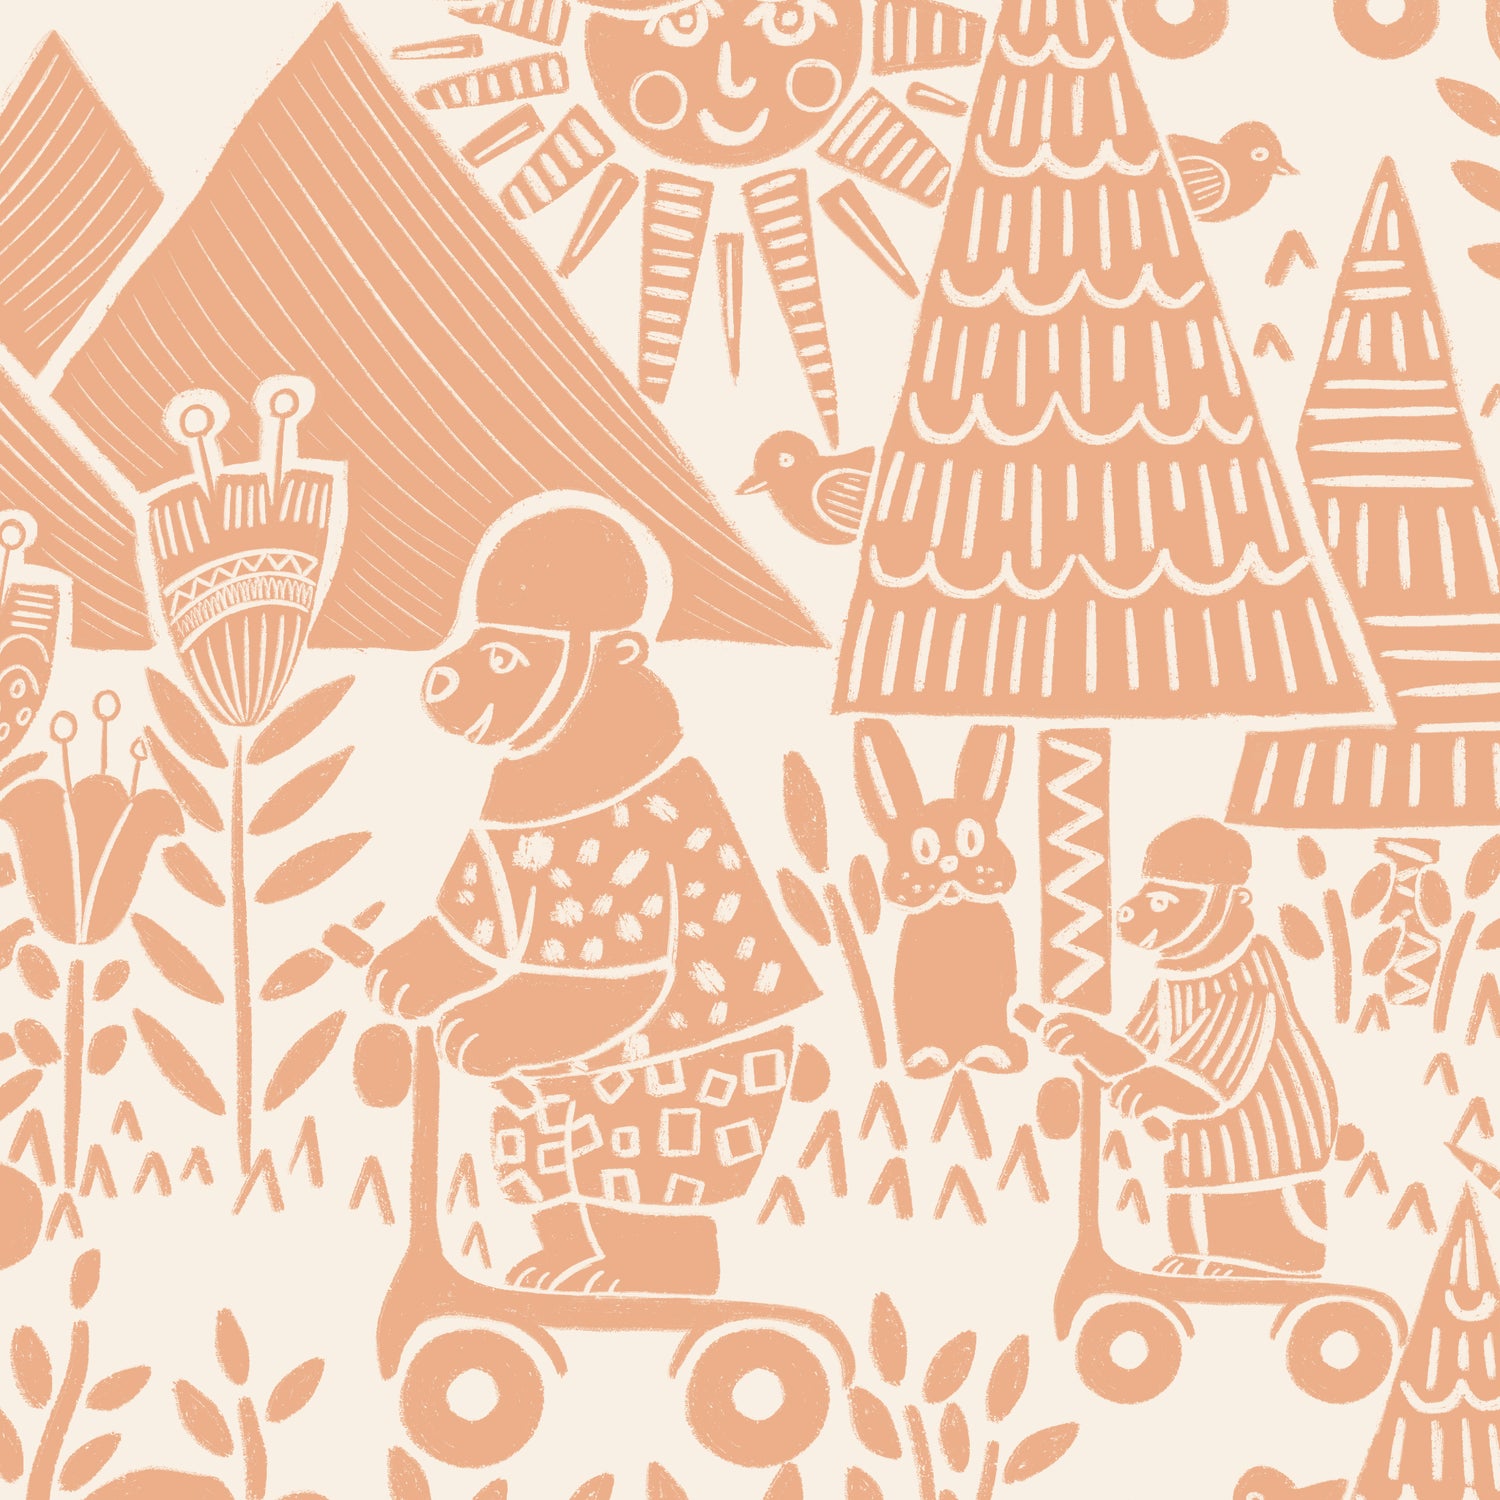 Scooting Bears Wallpaper in Apricot shown in a close up view.